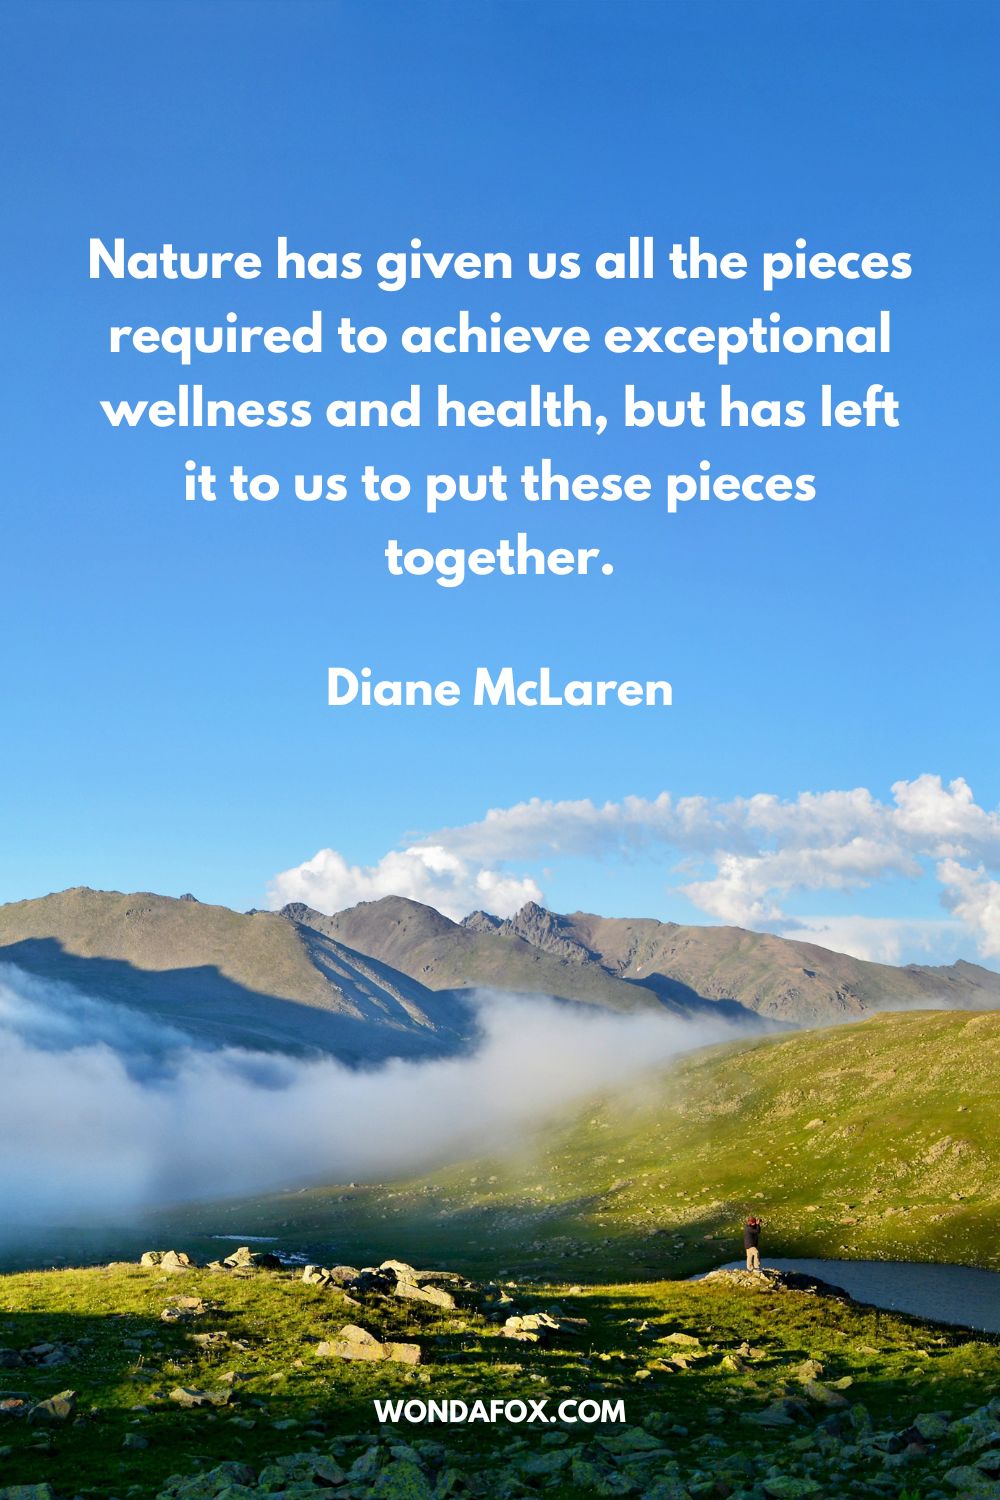 Nature has given us all the pieces required to achieve exceptional wellness and health, but has left it to us to put these pieces together. Diane McLaren